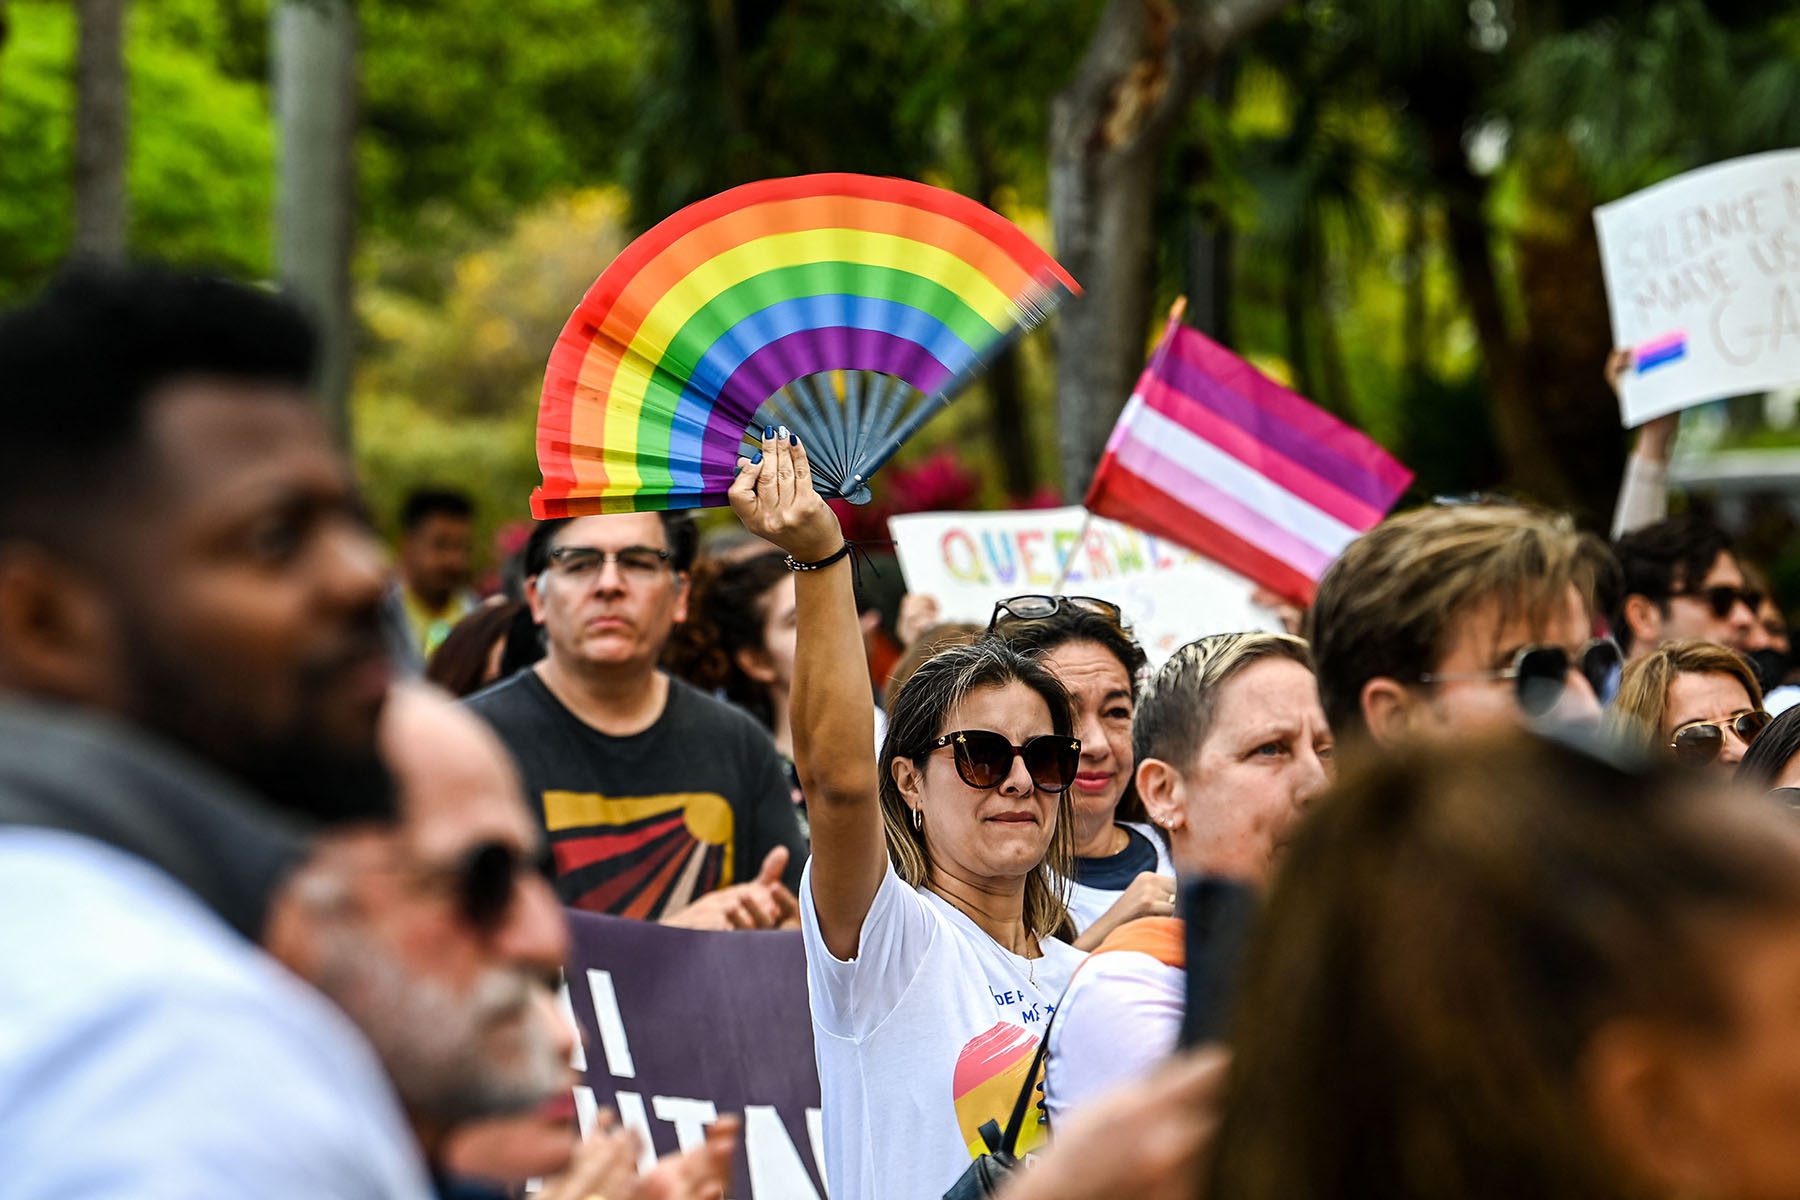 Members and supporters of the LGBTQ community, several of them holding flags and posters, attend the "Say Gay Anyway" rally.